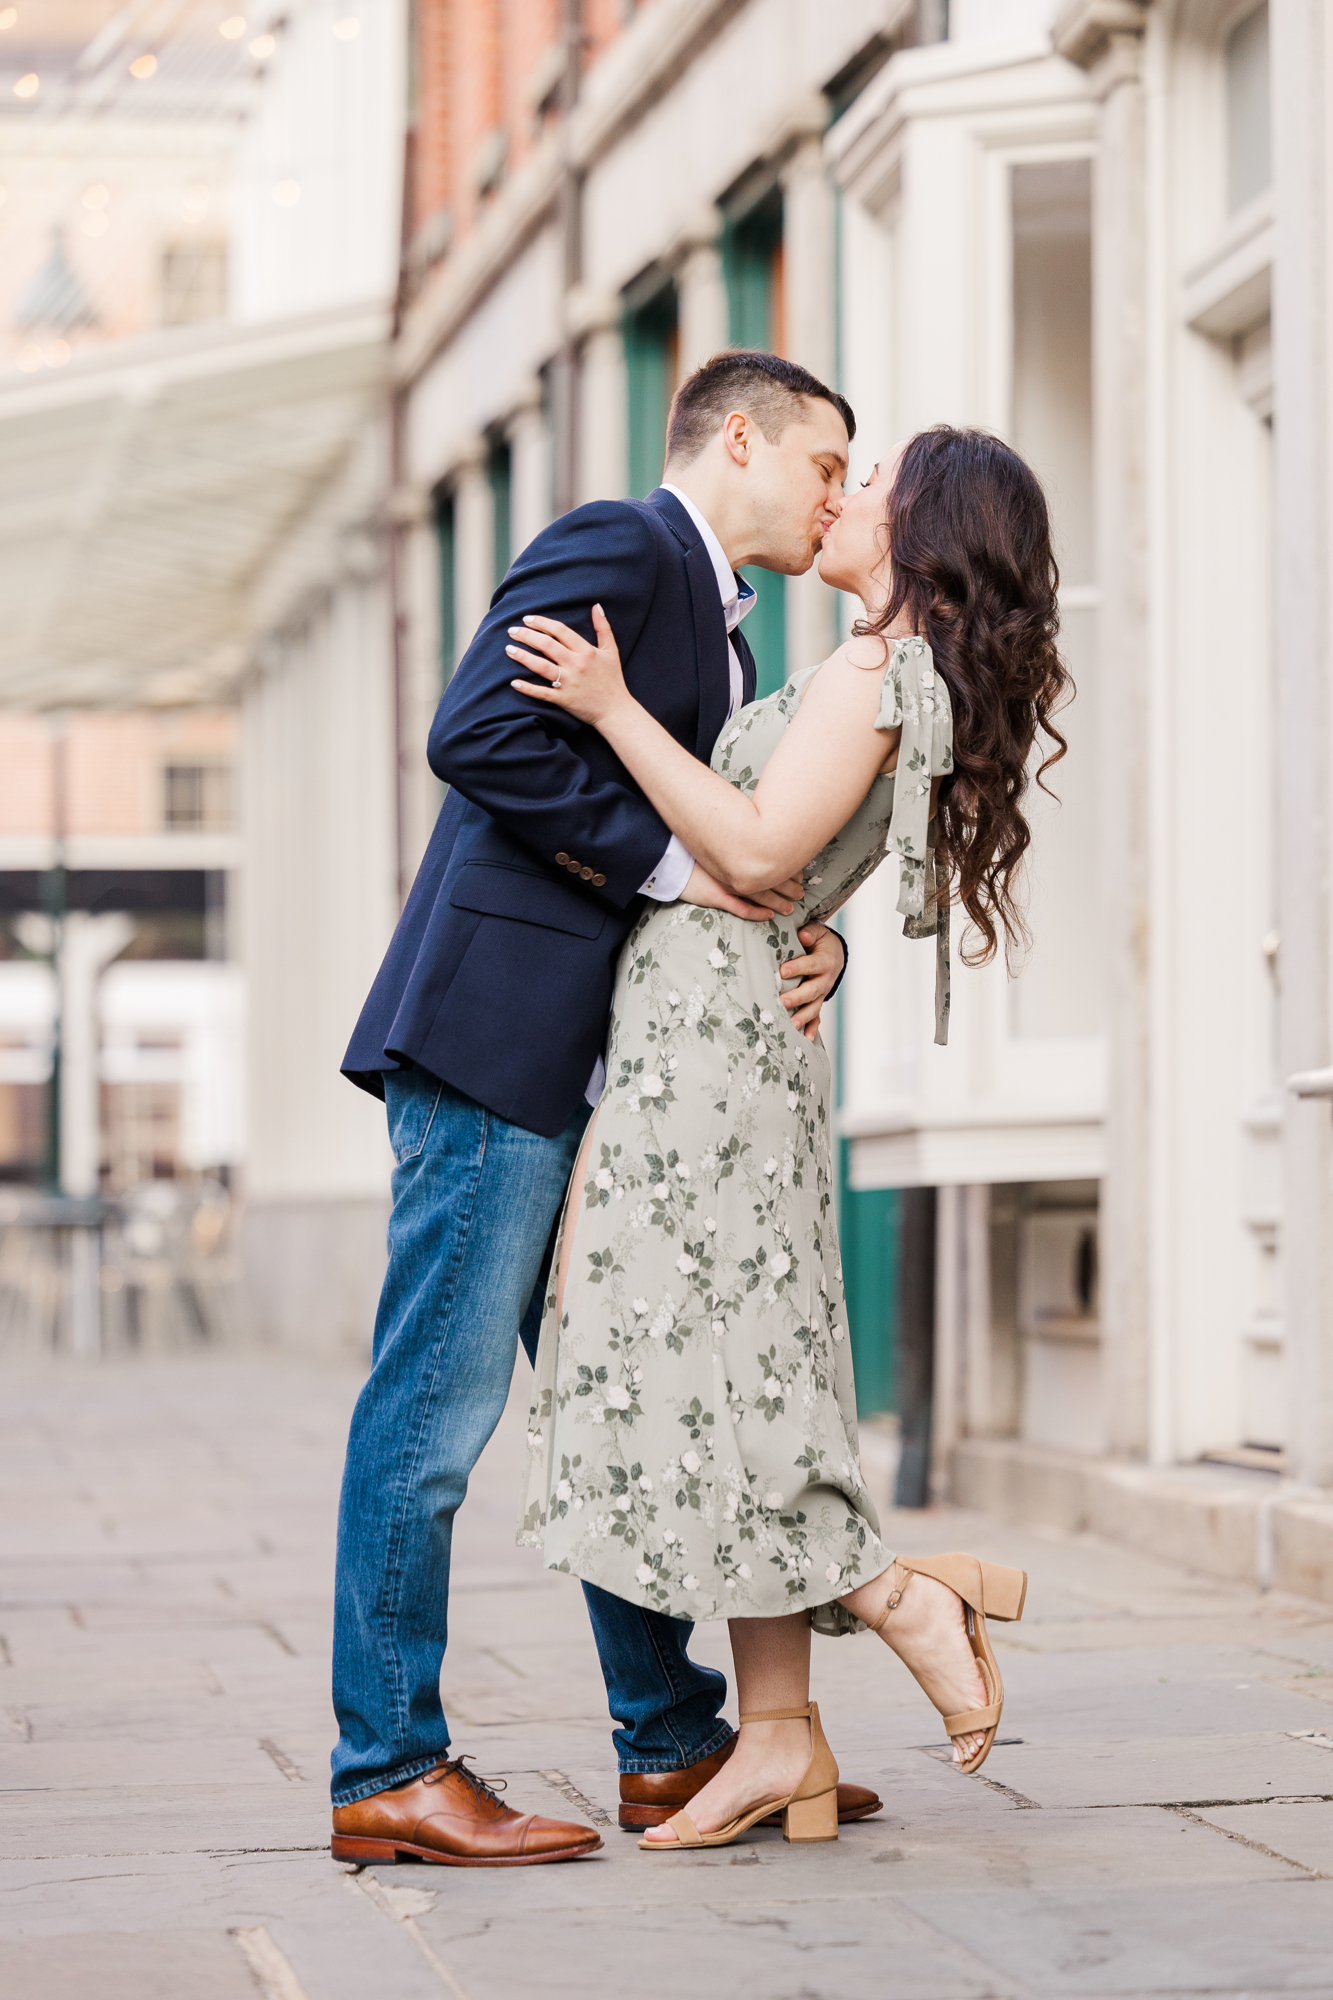 Enchanting Brooklyn Bridge and South Street Seaport Engagement Photography